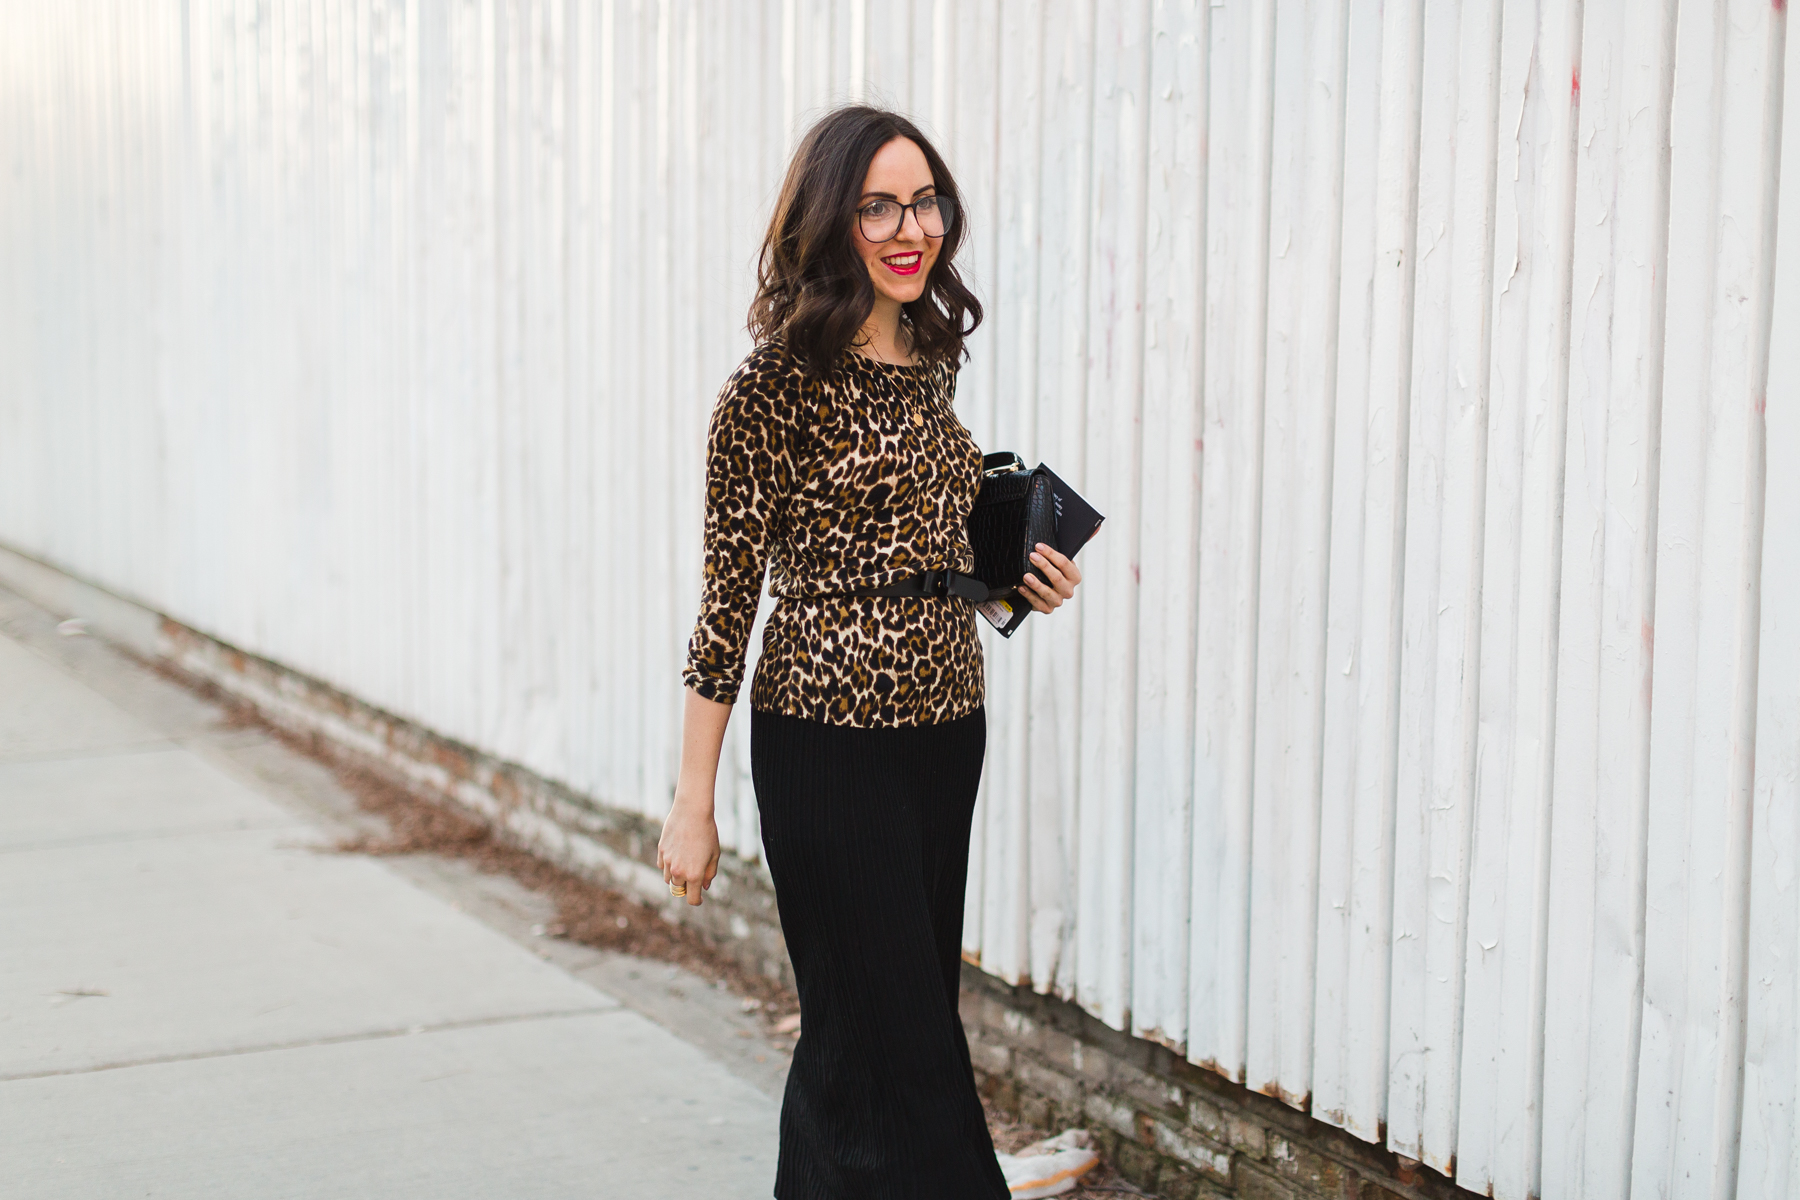 Yana Frigelis of NoMad Luxuries wearing a leopard sweater from Jcrew and a midi length skirt from mango for a classic look